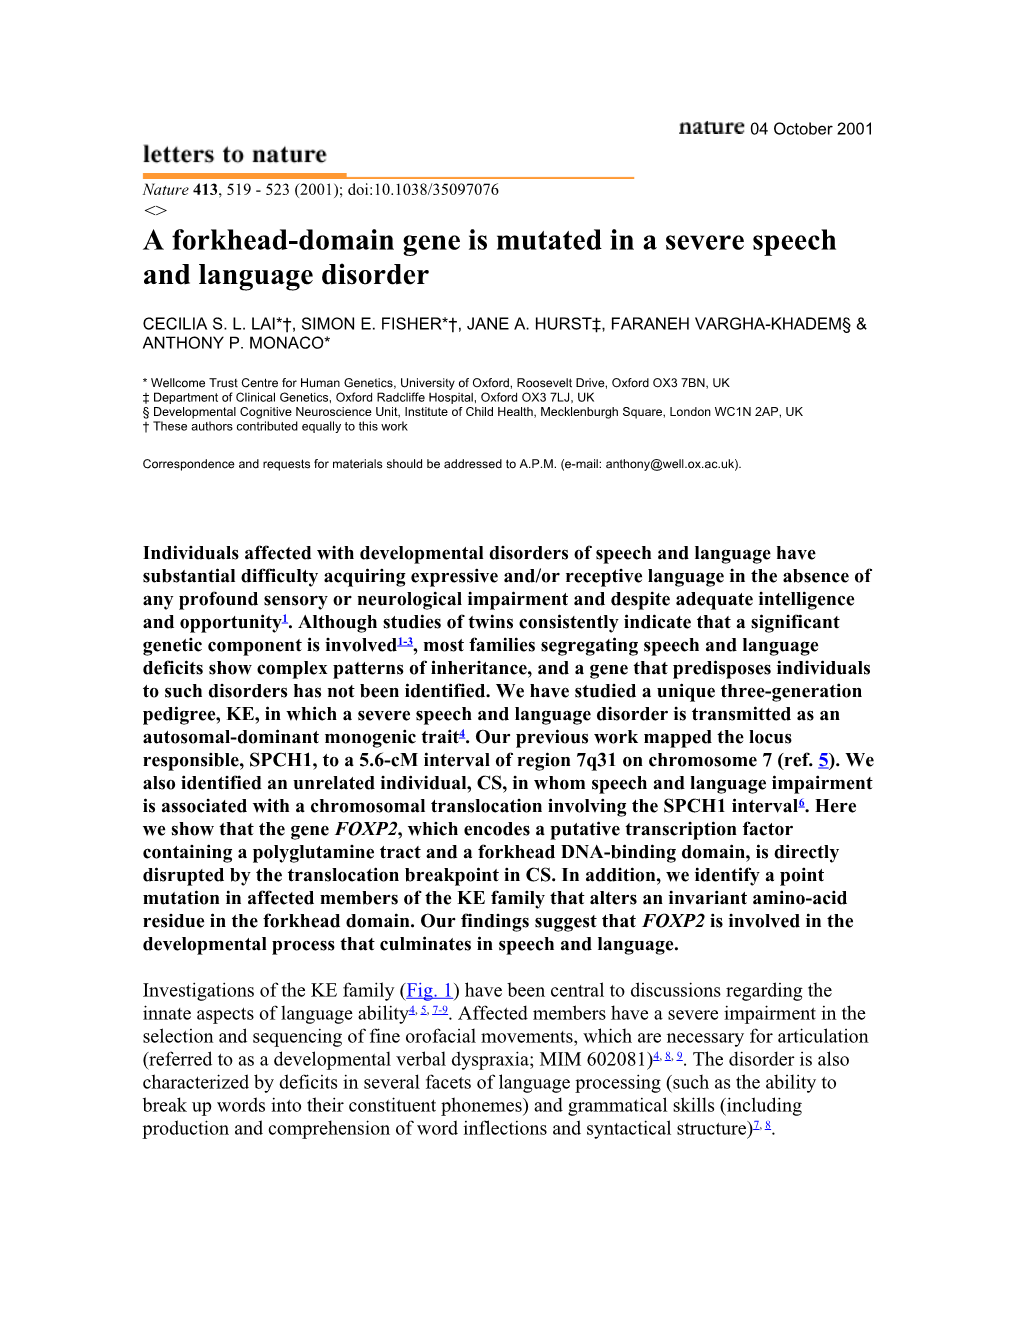 A Forkhead-Domain Gene Is Mutated in a Severe Speech and Language Disorder